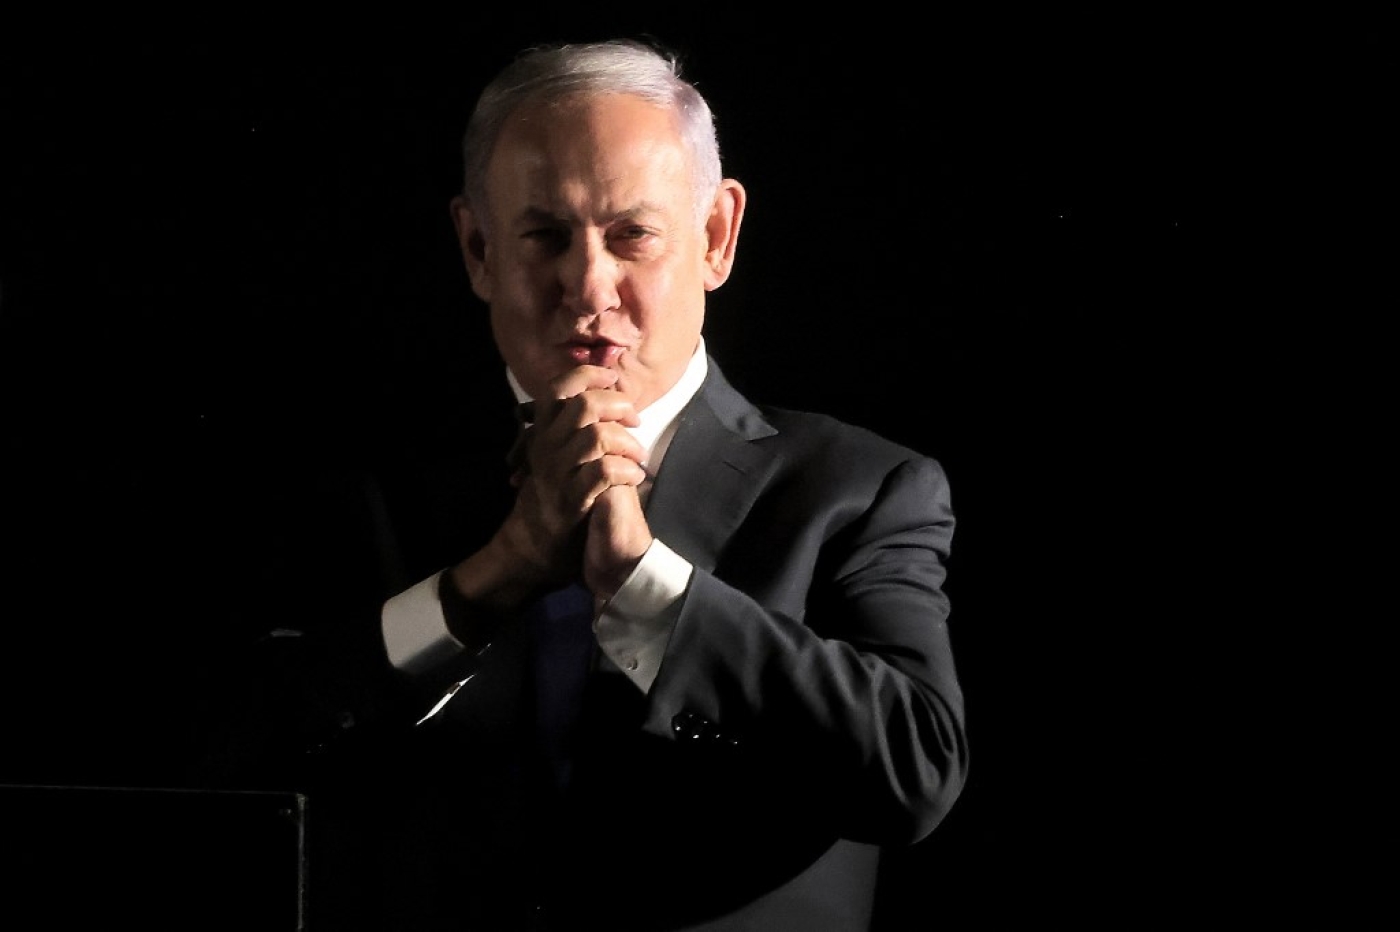 Former Israeli prime minister and current leader of the opposition Benjamin Netanyahu gestures to supporters during an anti-government protest in Jerusalem on 6 April 2022. (AFP)